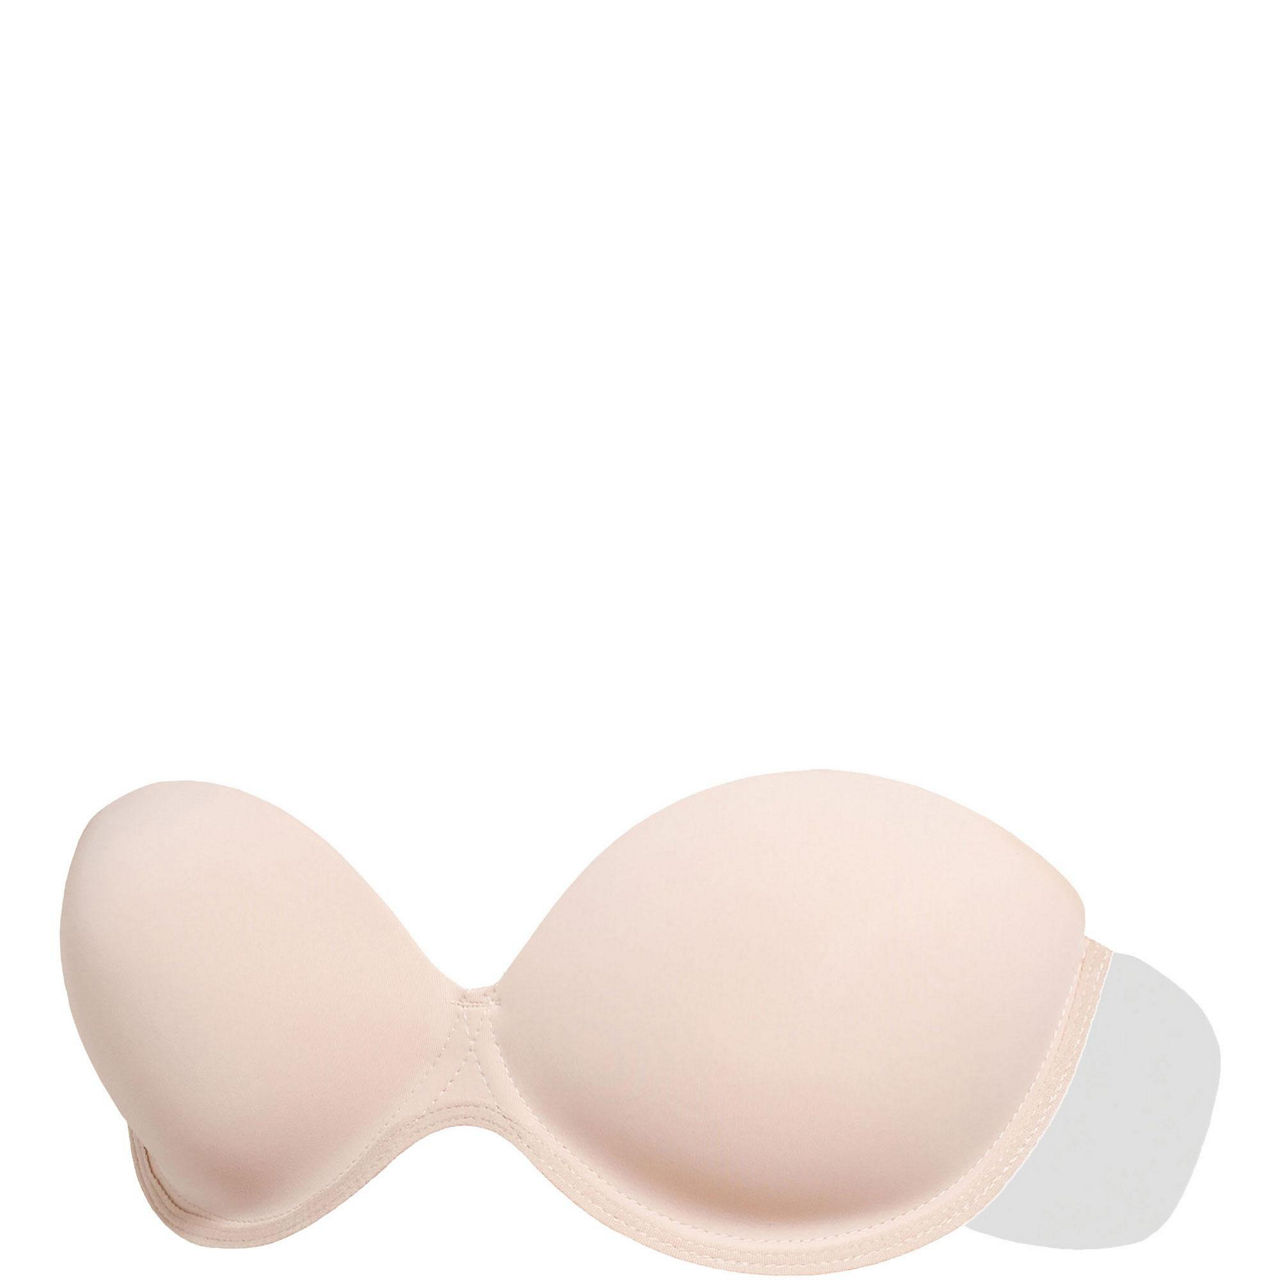 Strapless bra Absolute Invisible - Chantelle